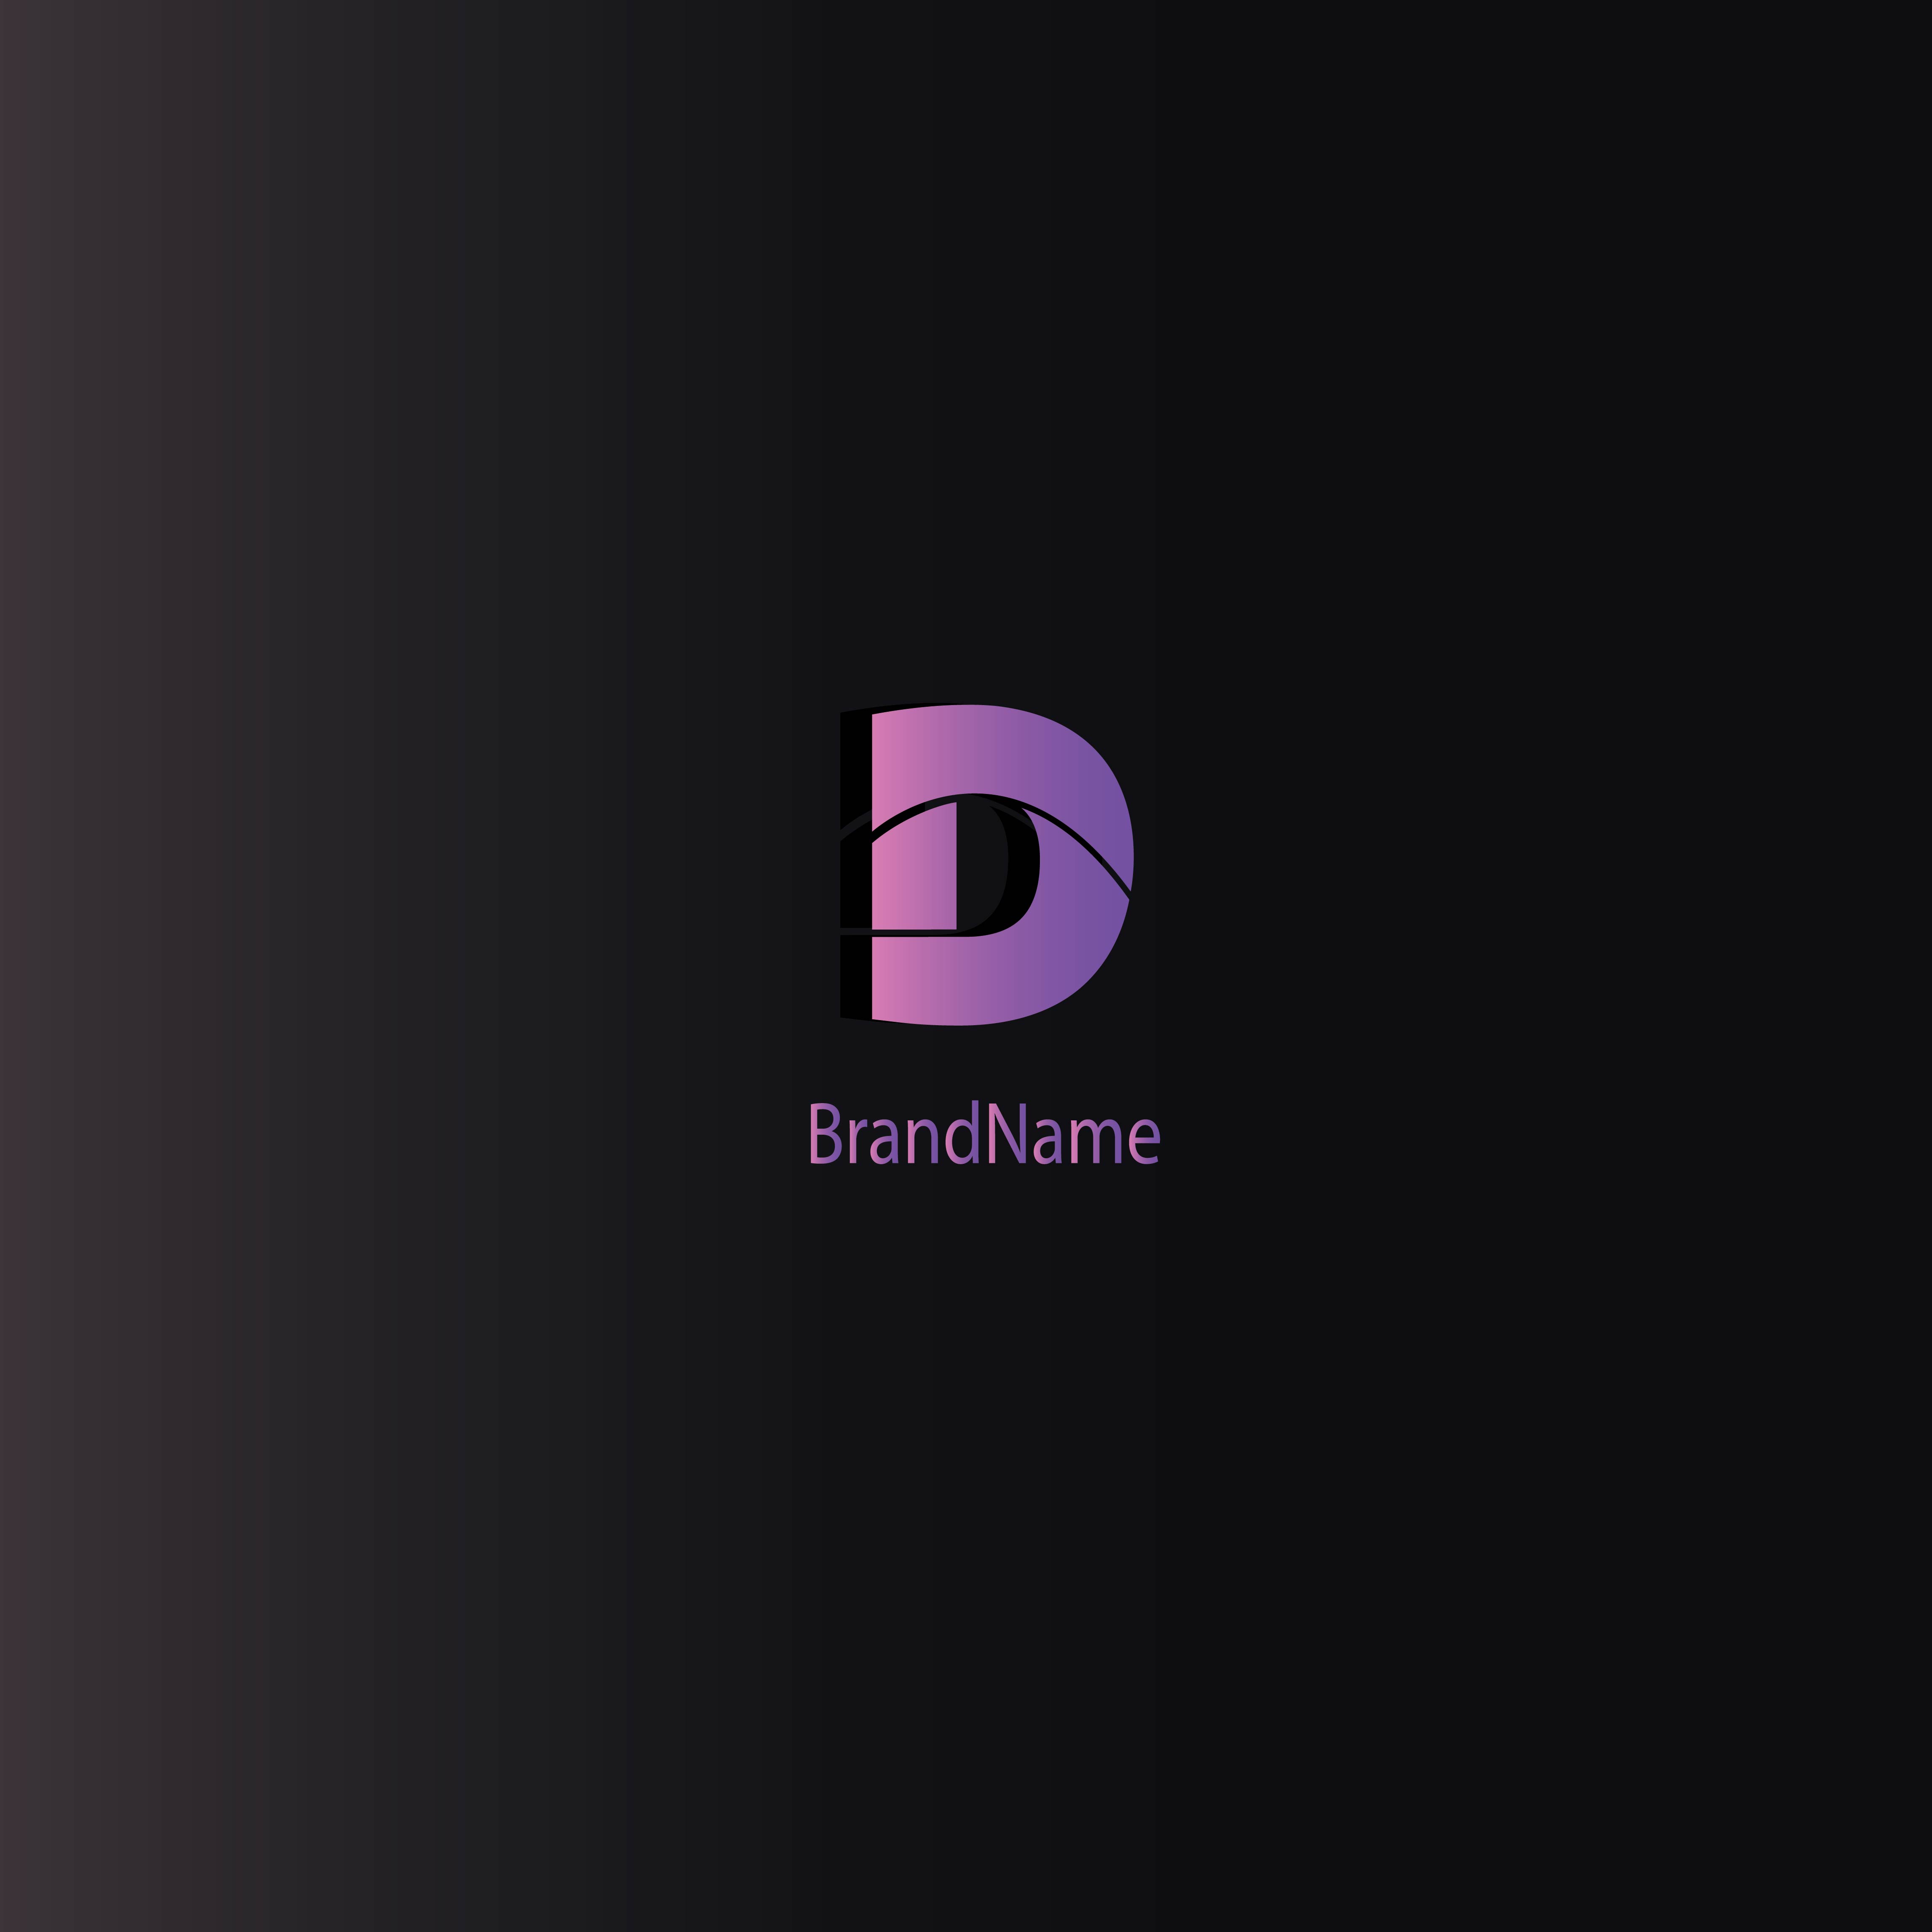 Logo for a brand with a letter d.